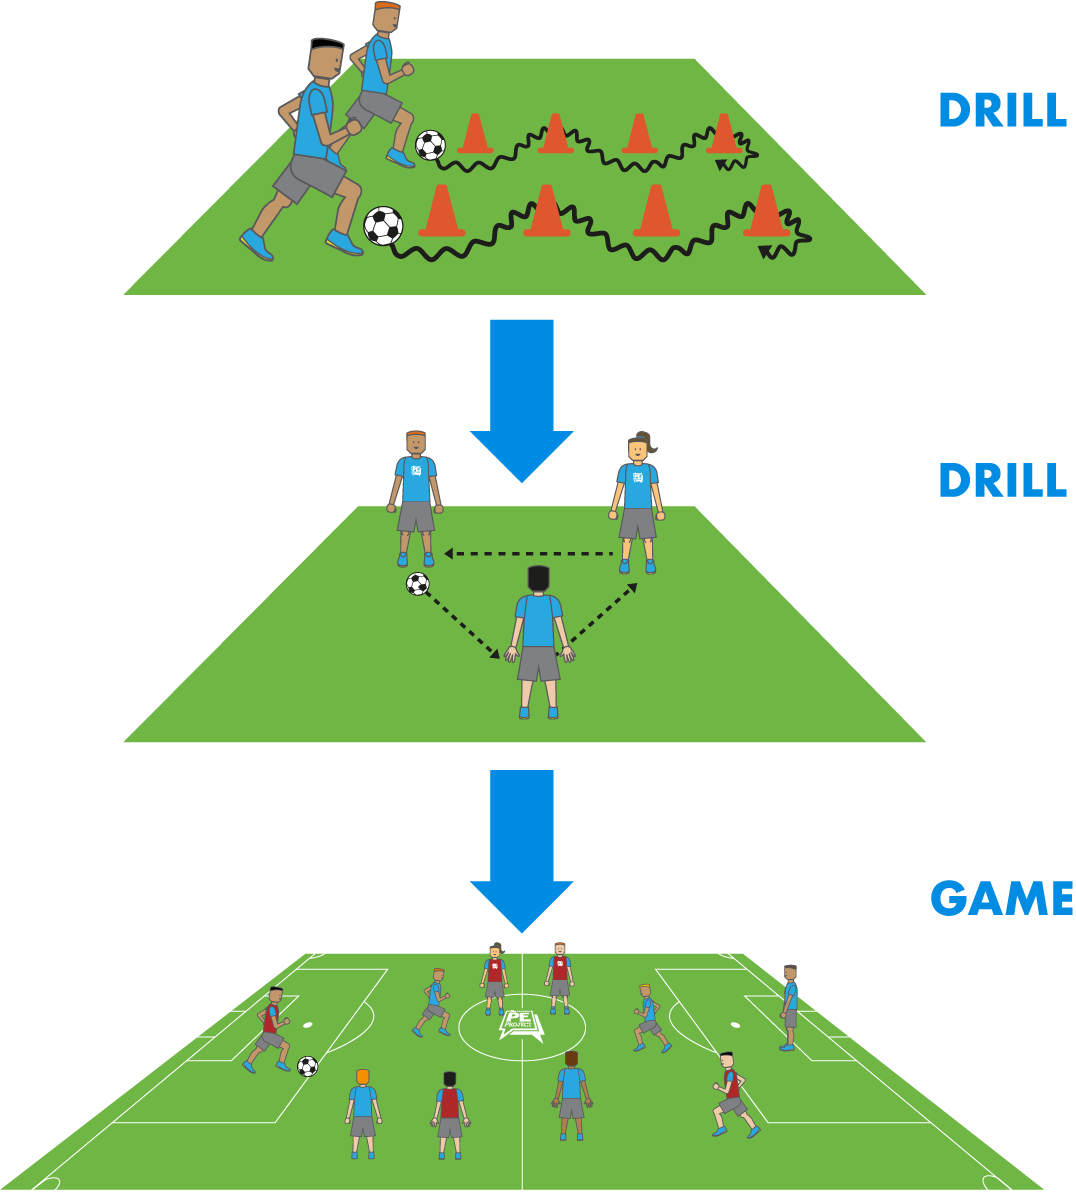 Diagram of a traditional teaching model: Drill, drill, game